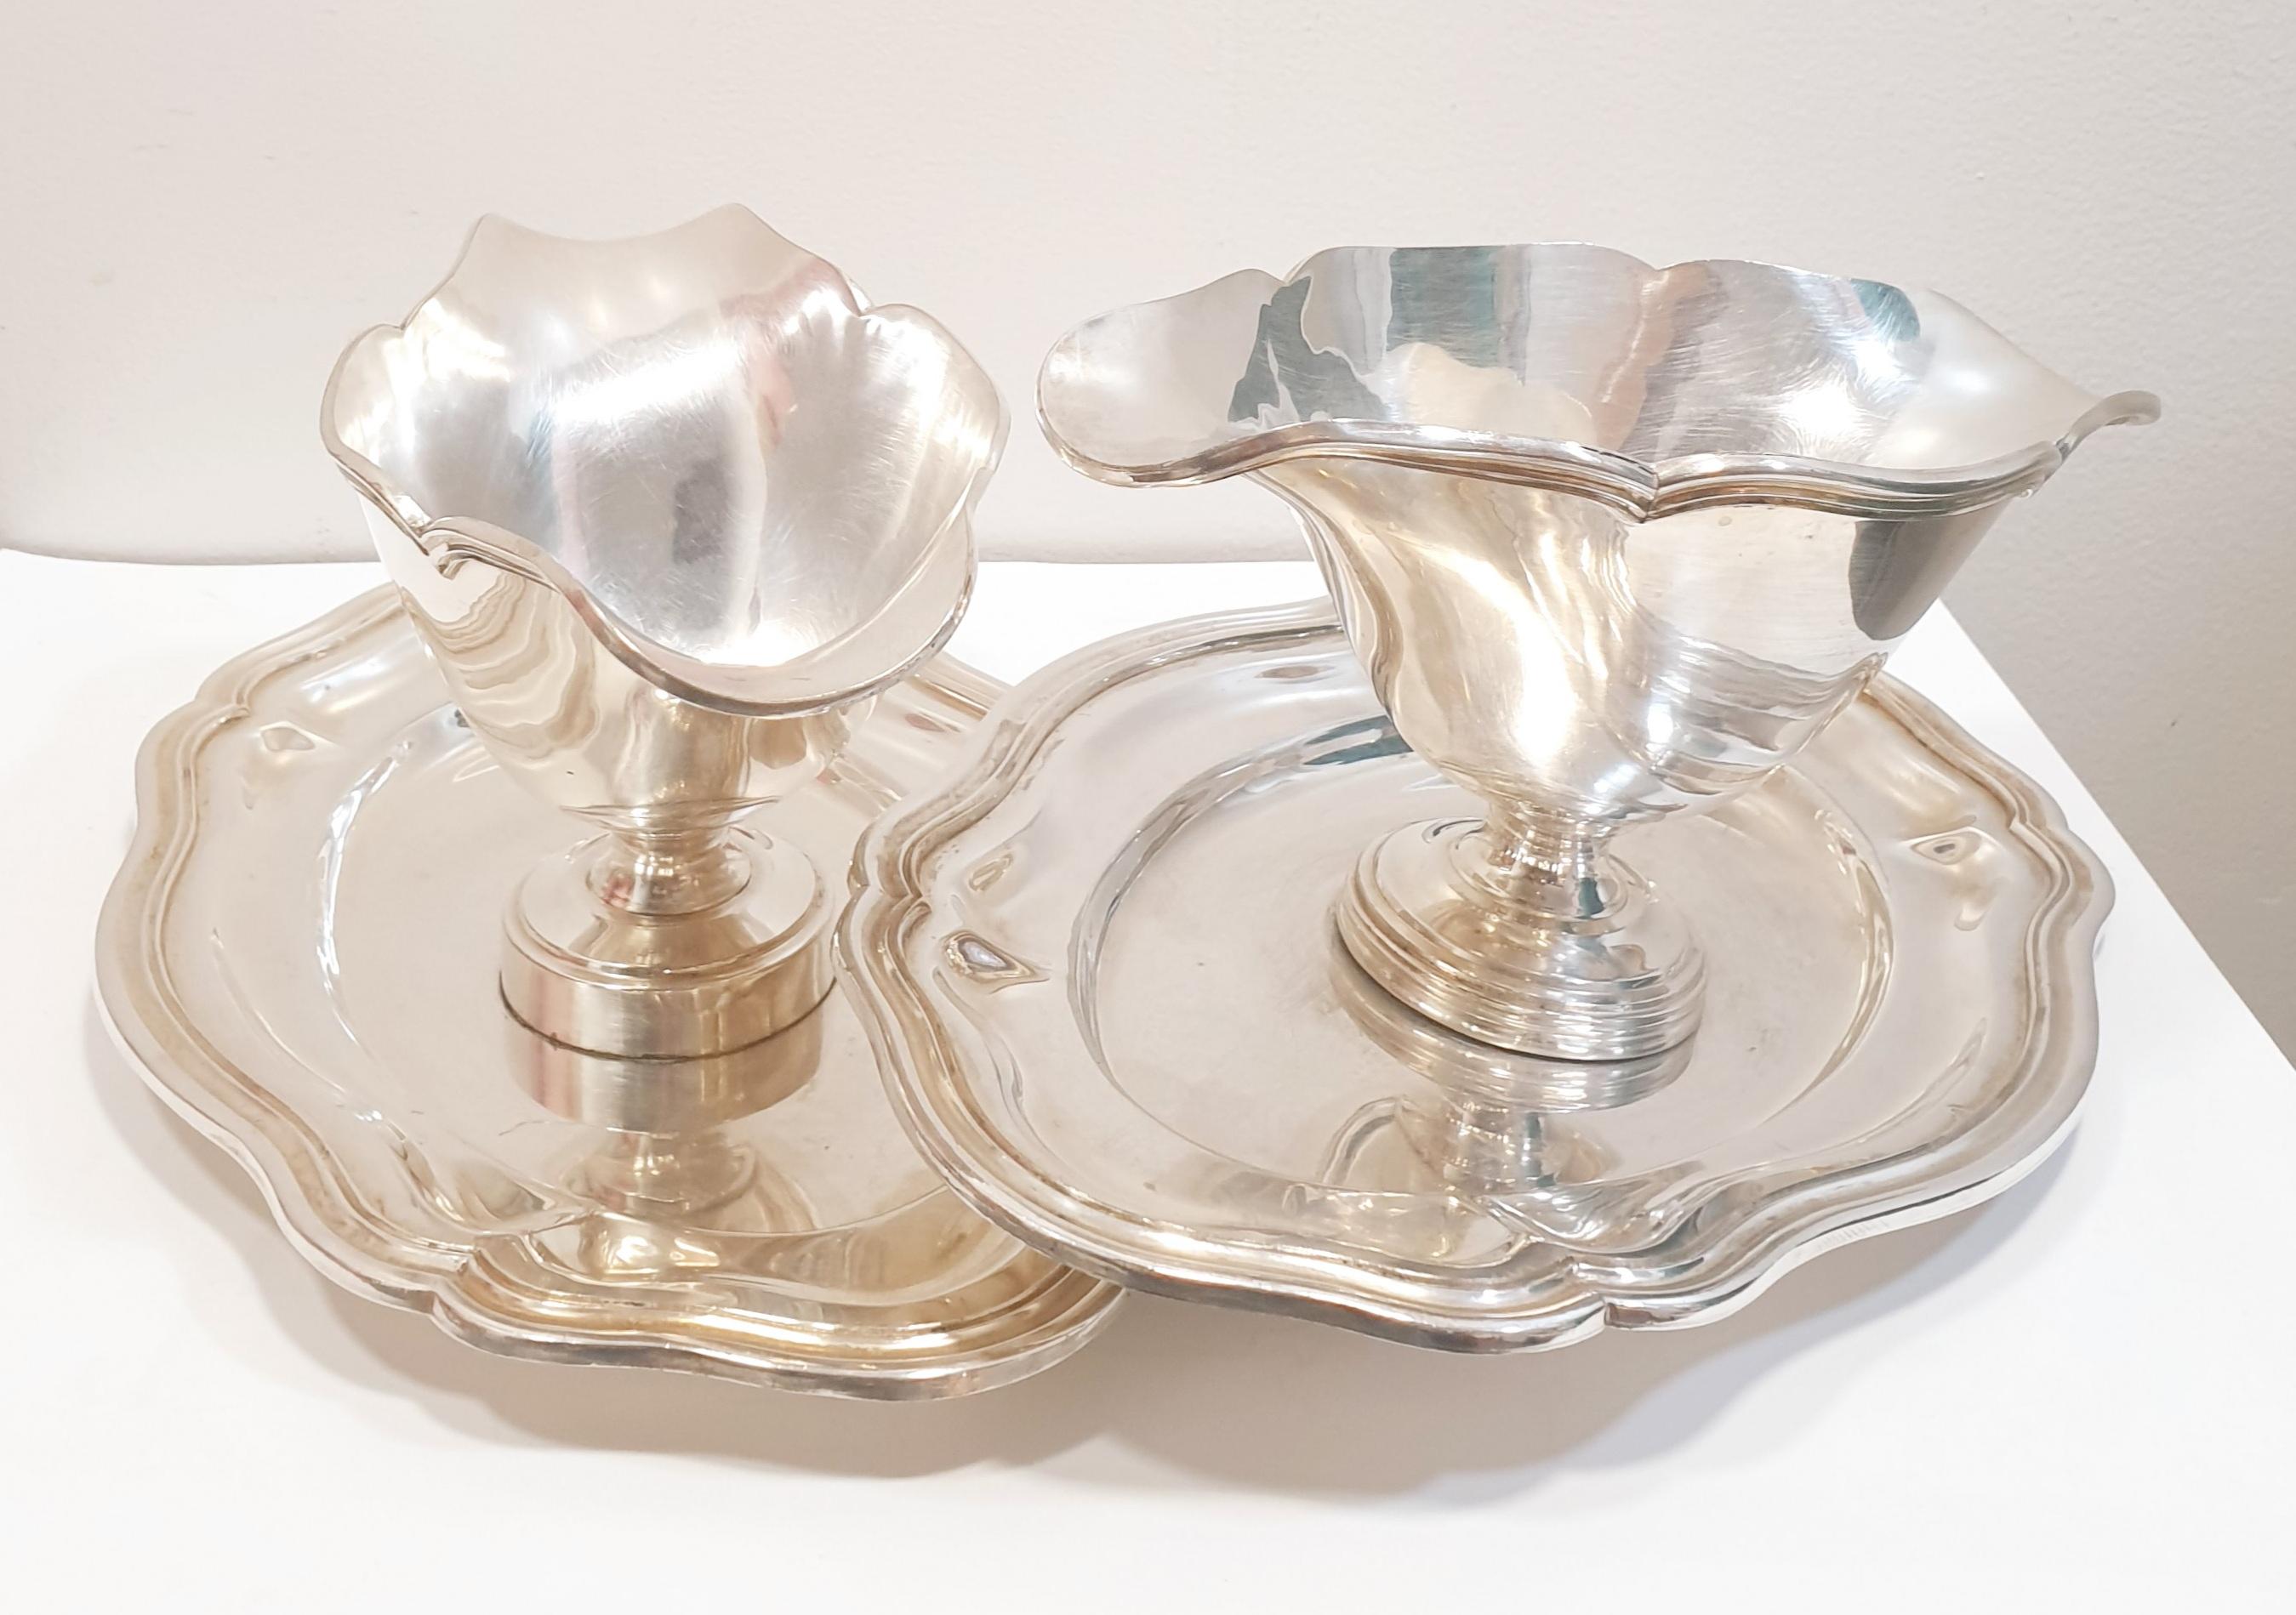 Romantic Set of 2 Antique Silver Sauce Boats from the 19th Century For Sale